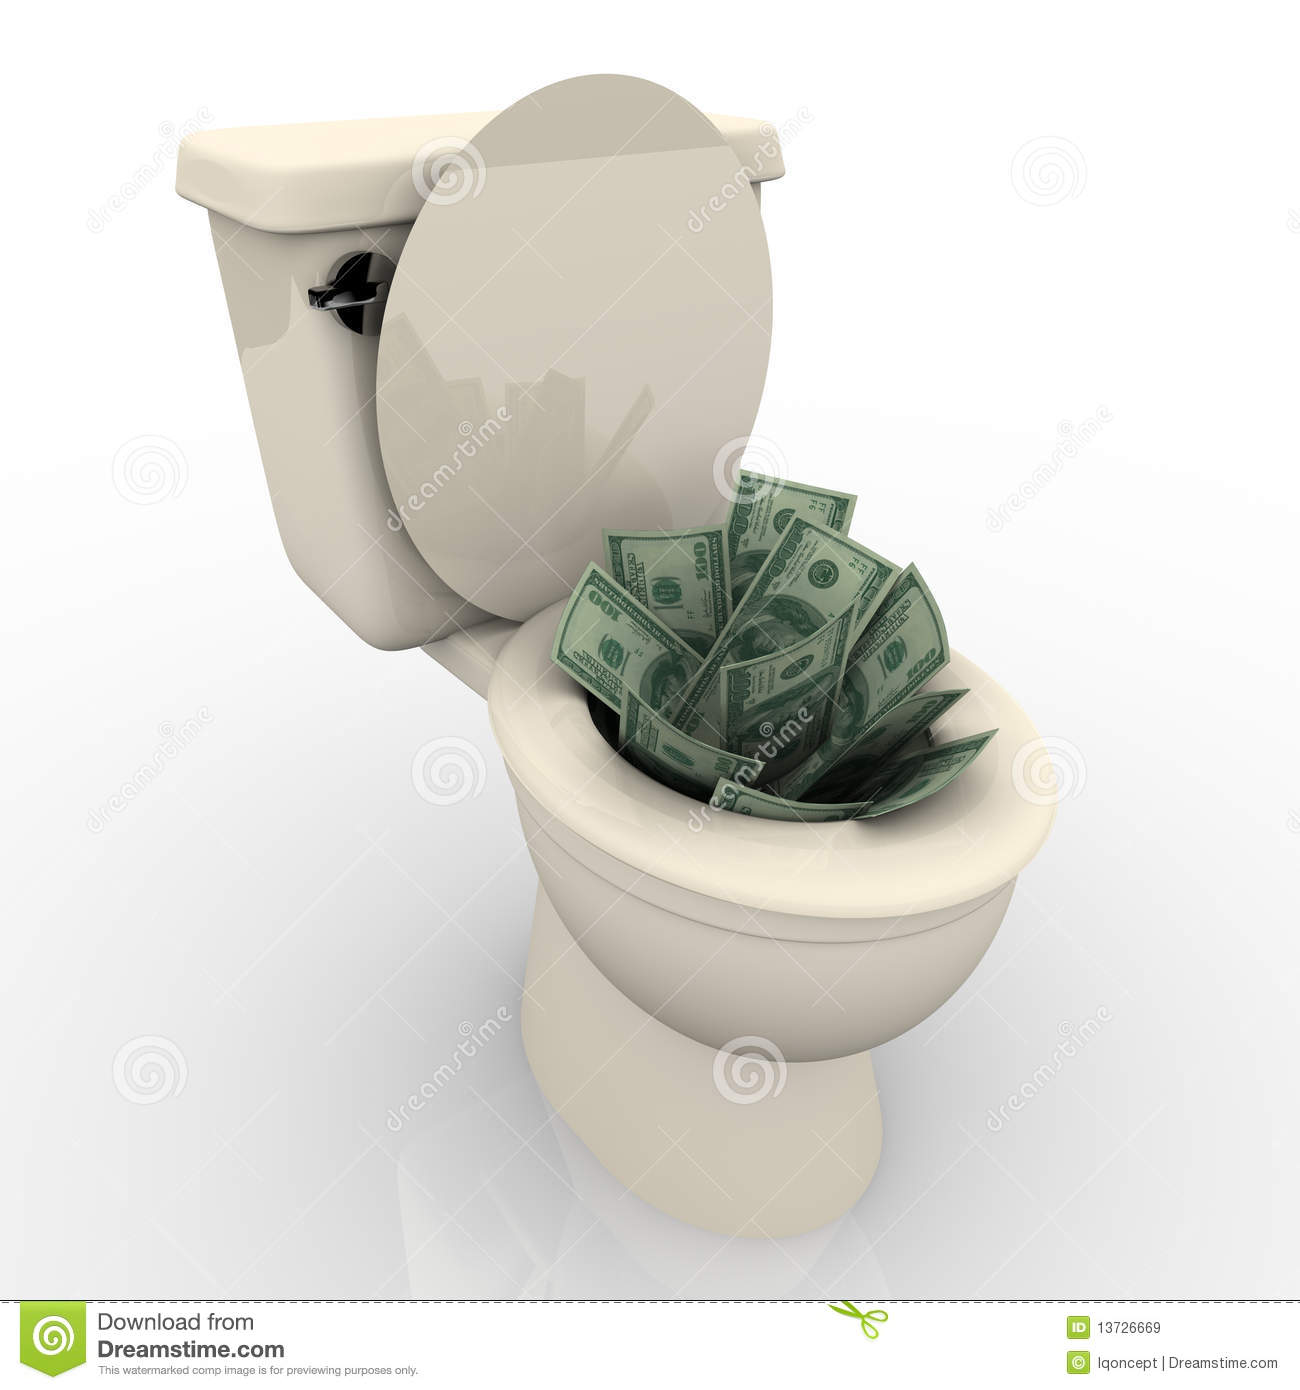 Flushing Money Down The Toilet Royalty Free Stock Images   Image